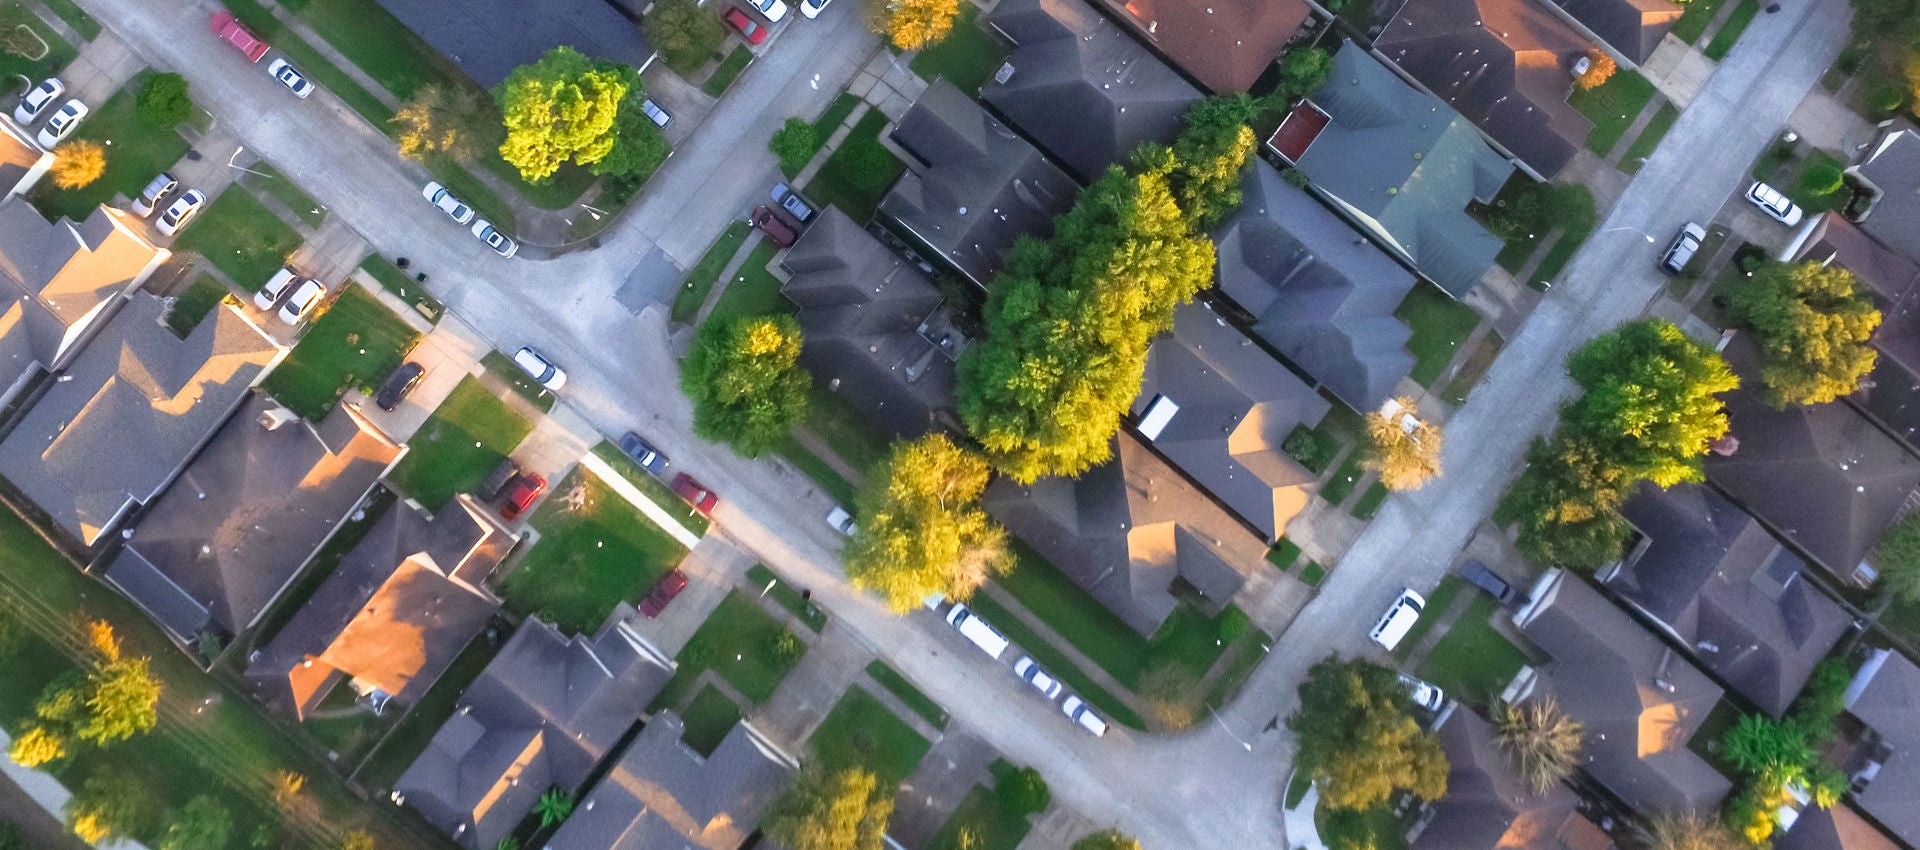 An aerial view of an American neighborhood at sunset.